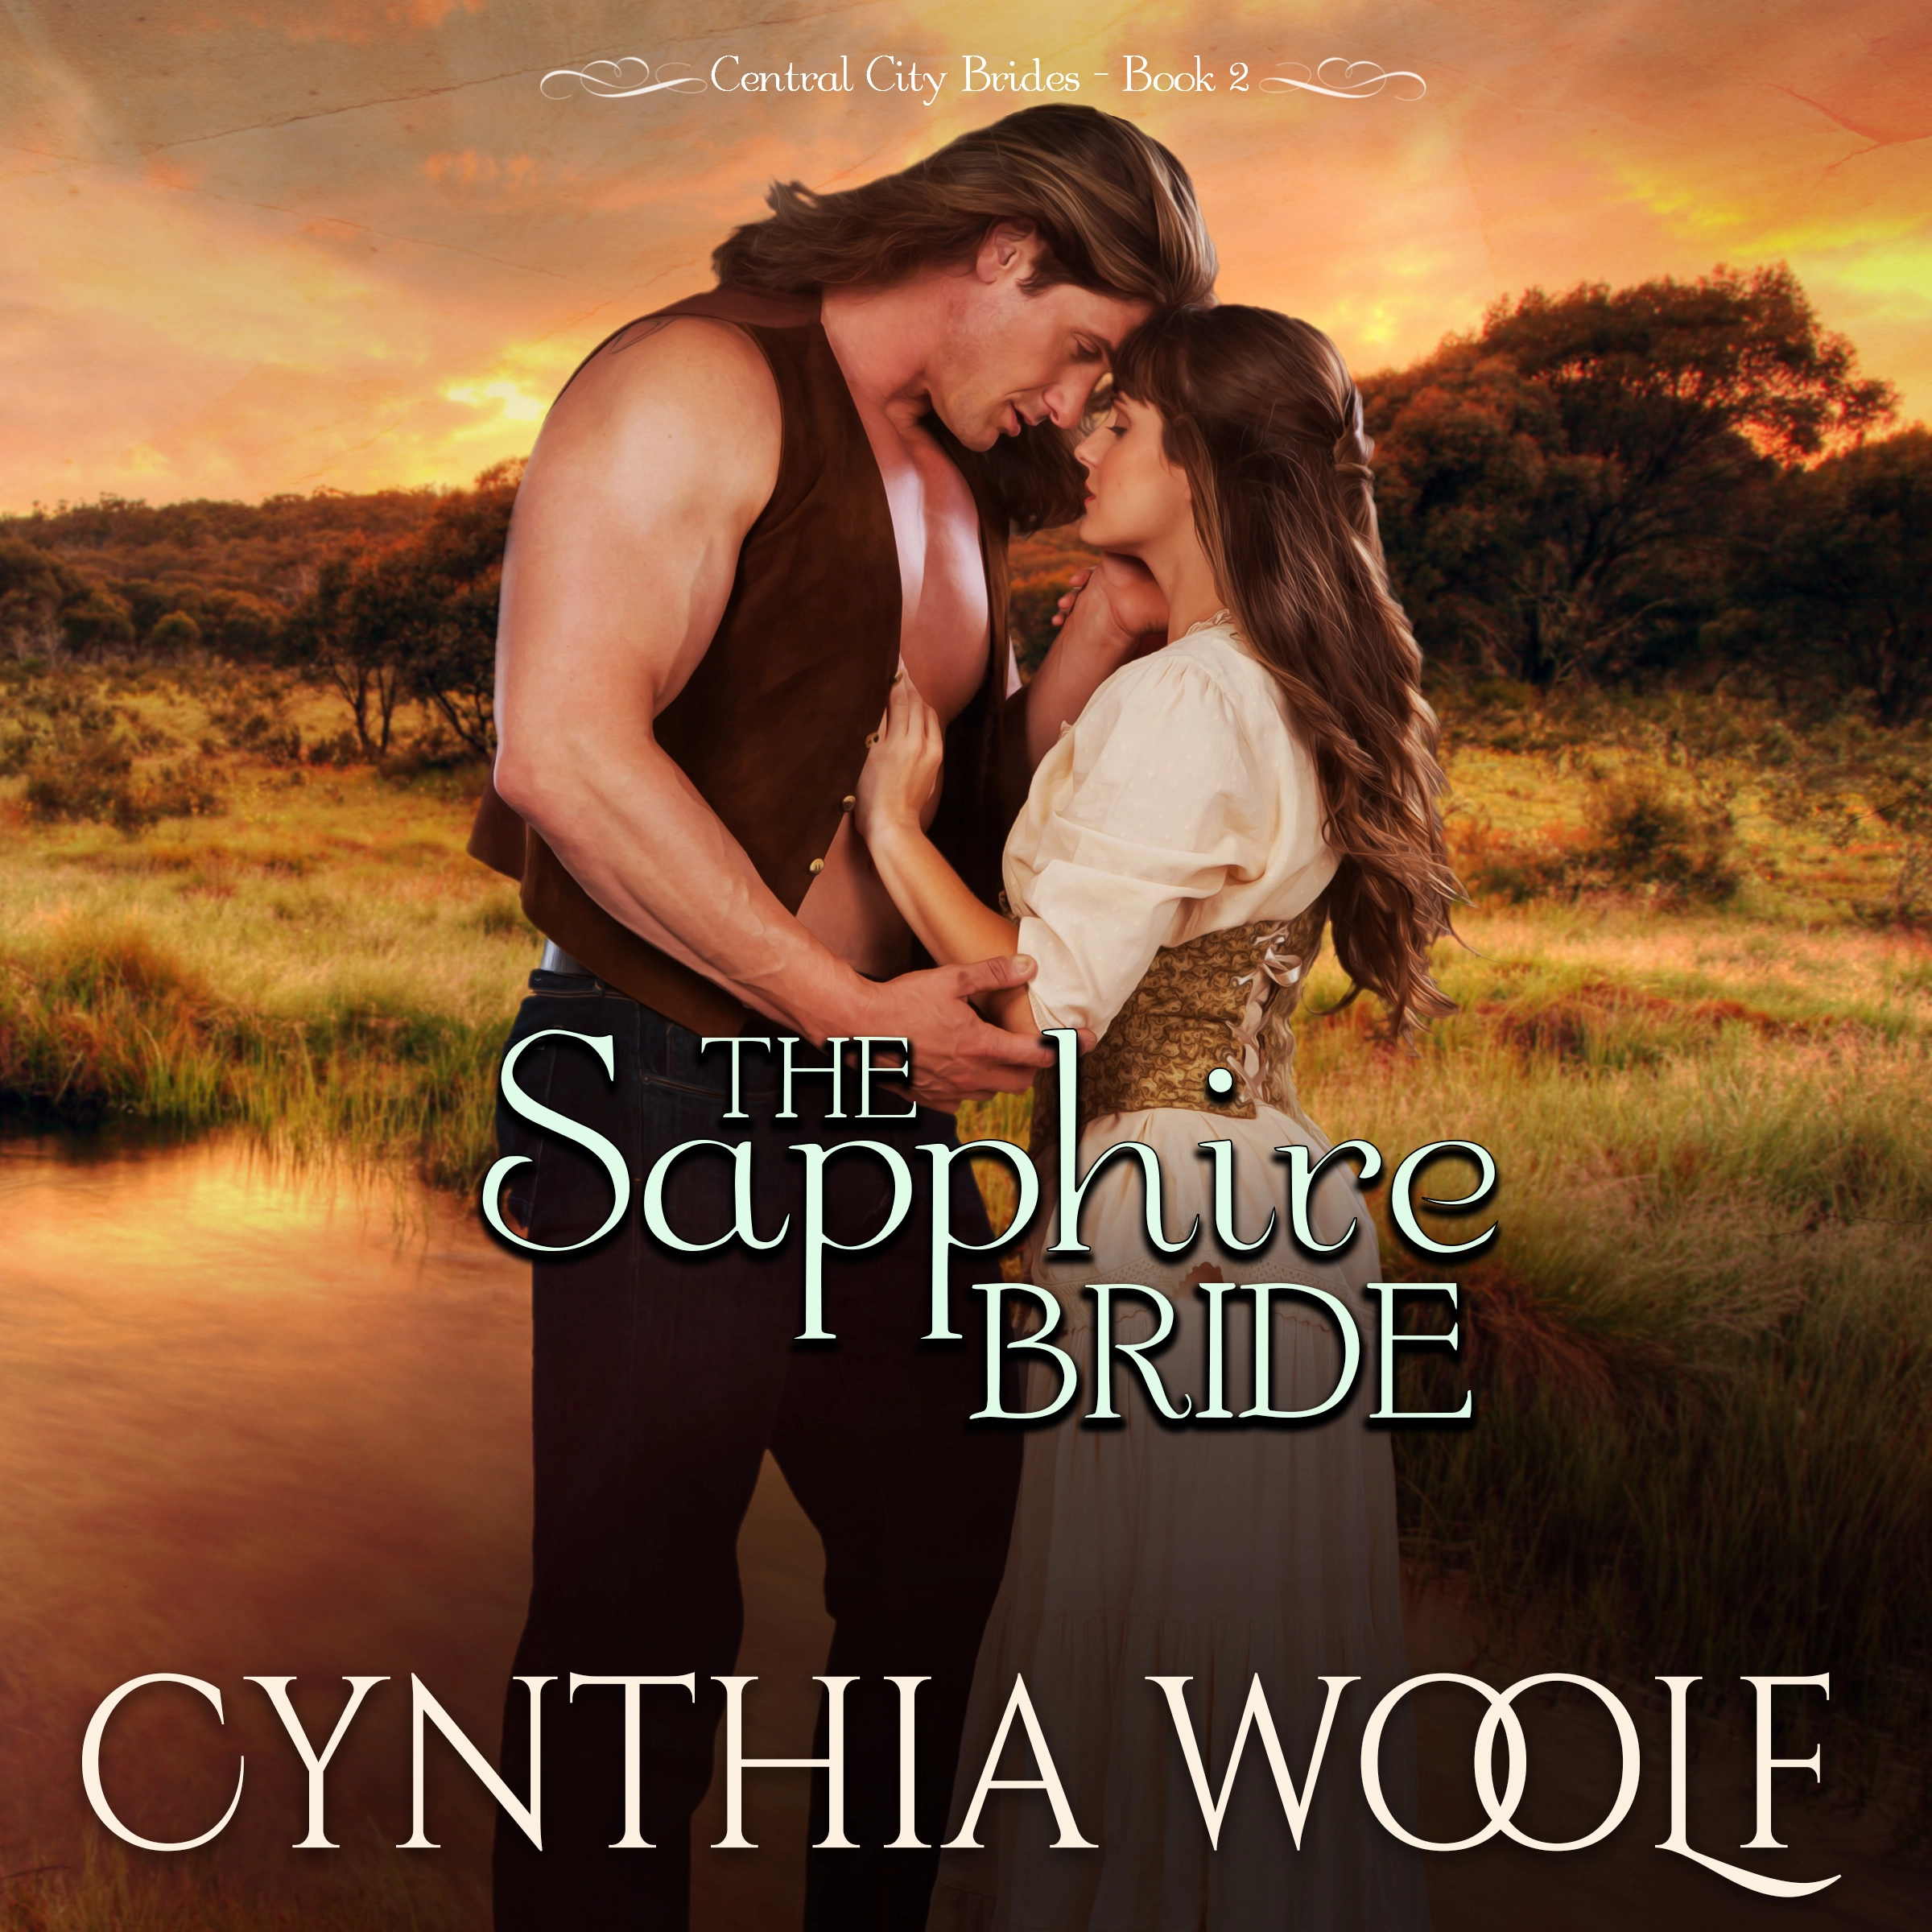 The Sapphire Bride Audiobook by Cynthia Woolf